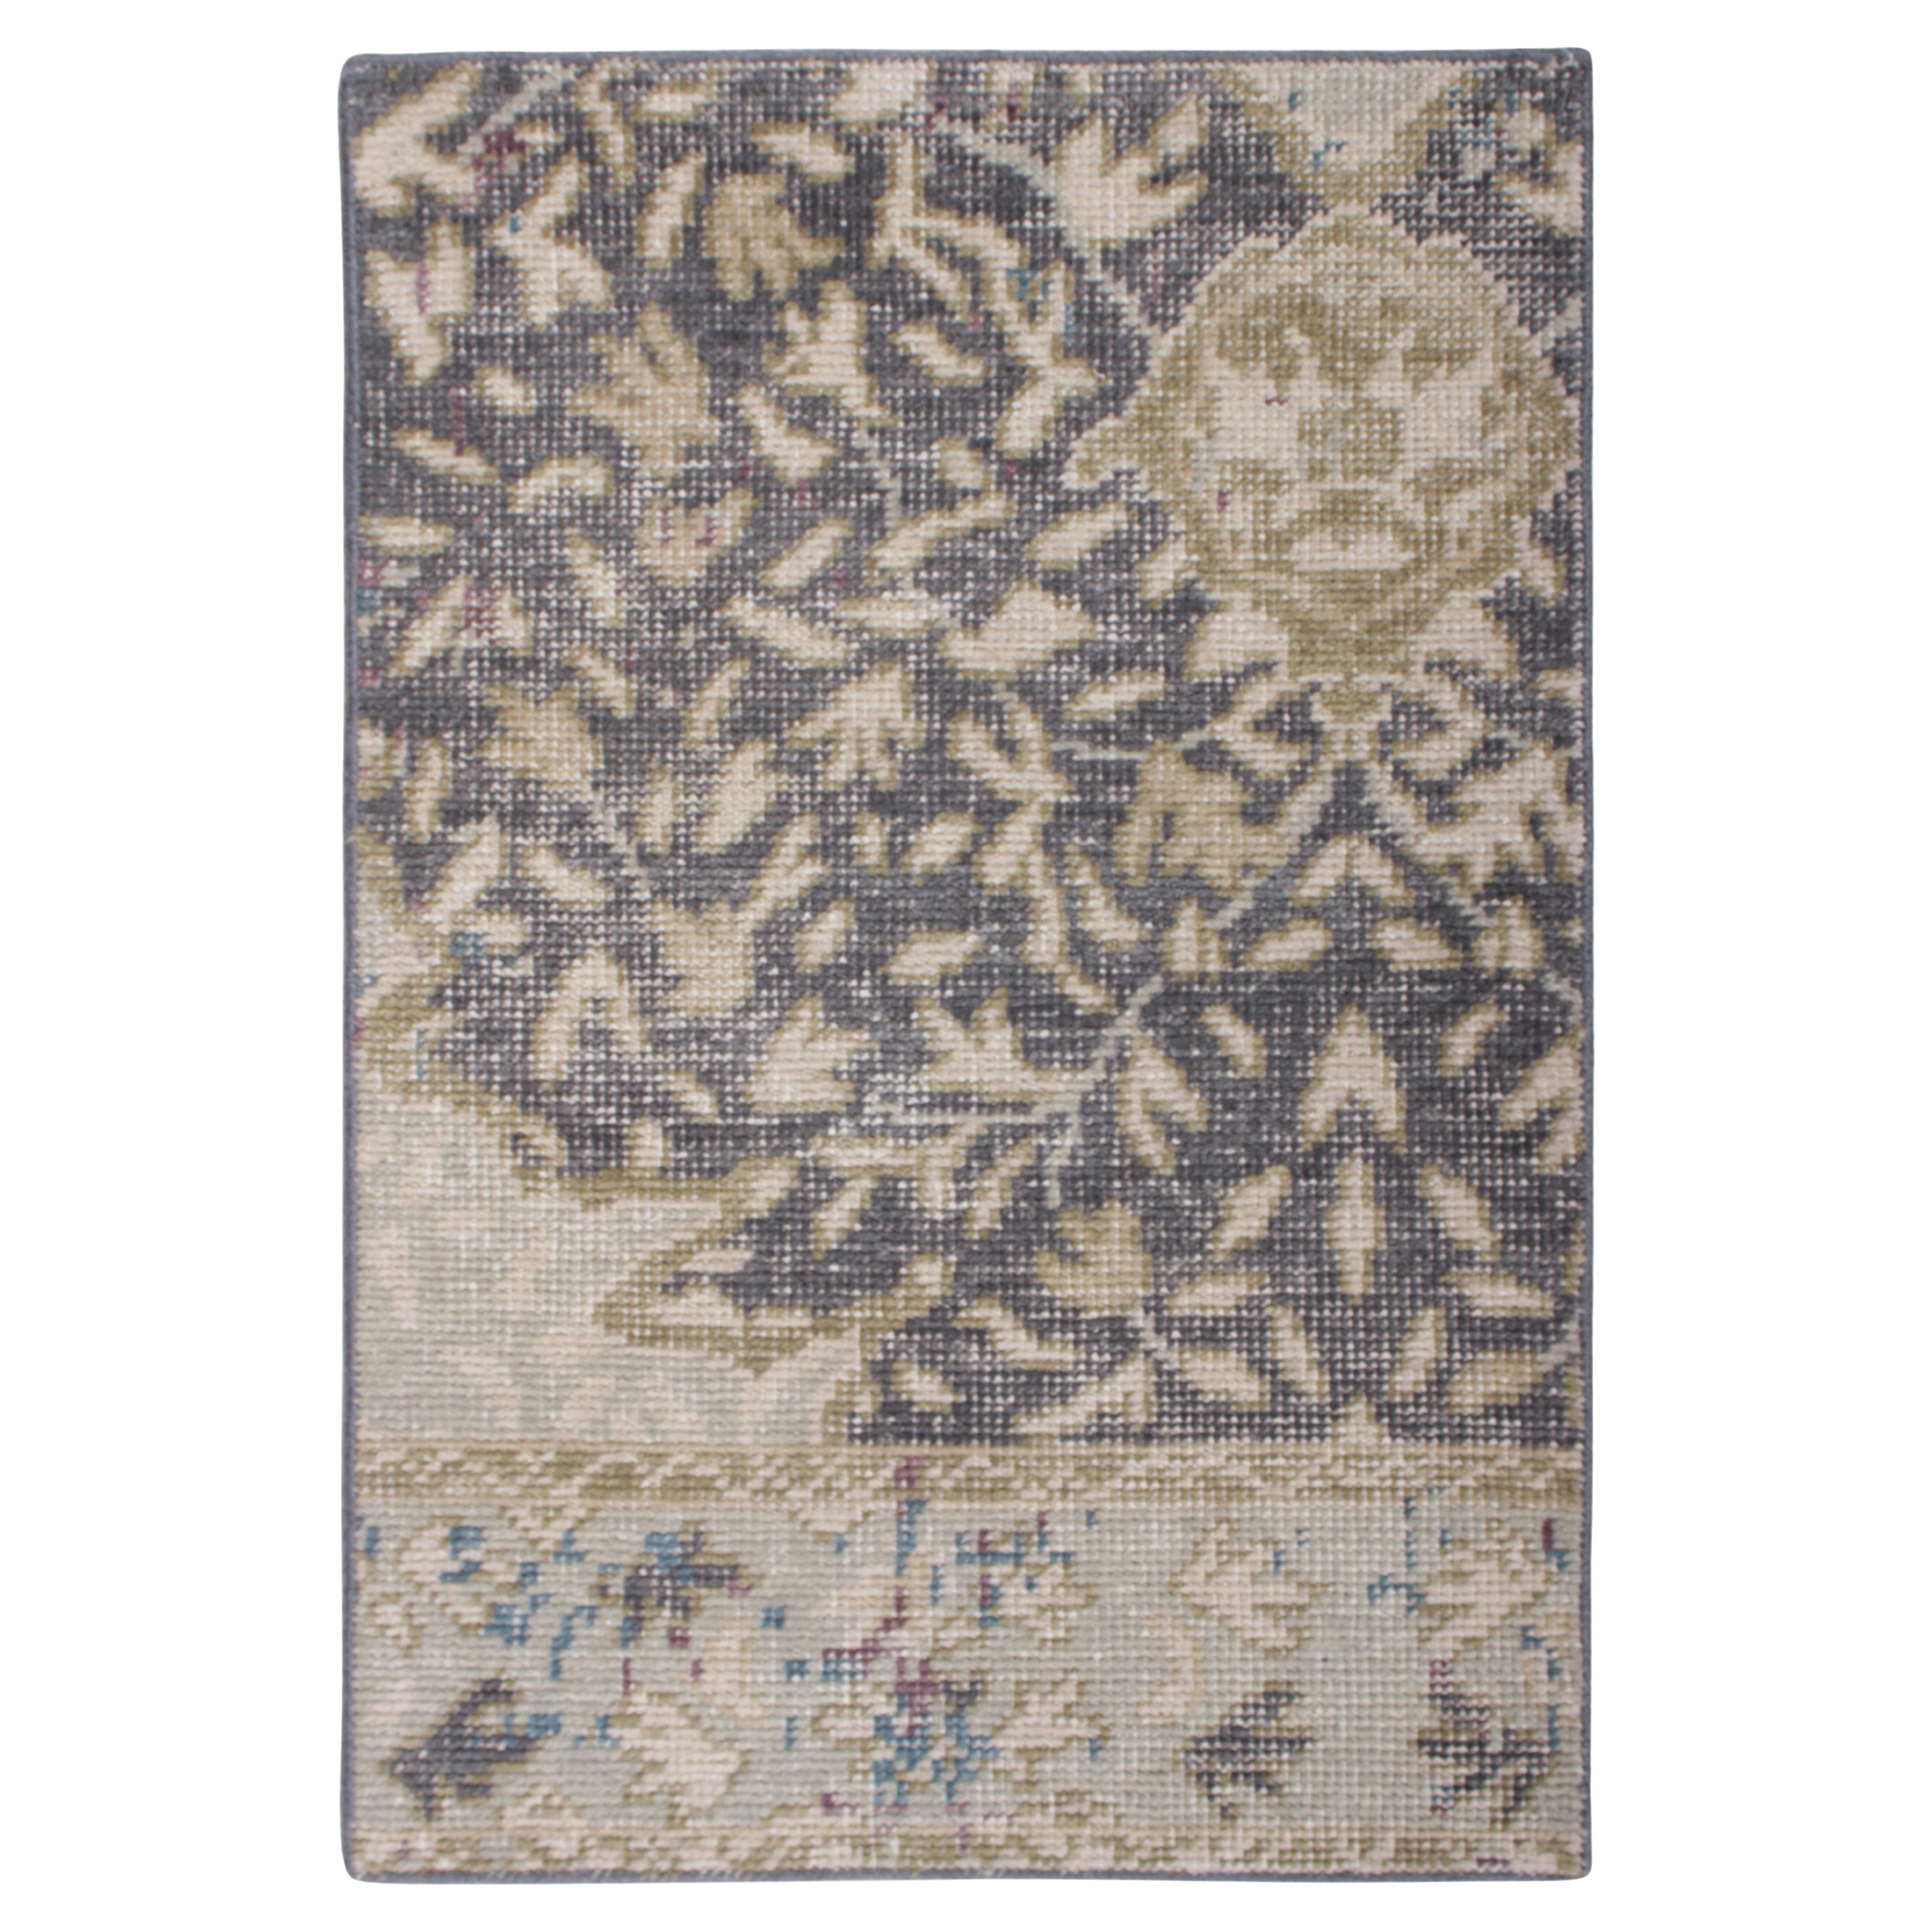 Rug & Kilim’s Distressed Style Gift-Size Rug in Blue, Beige-Brown Floral Pattern